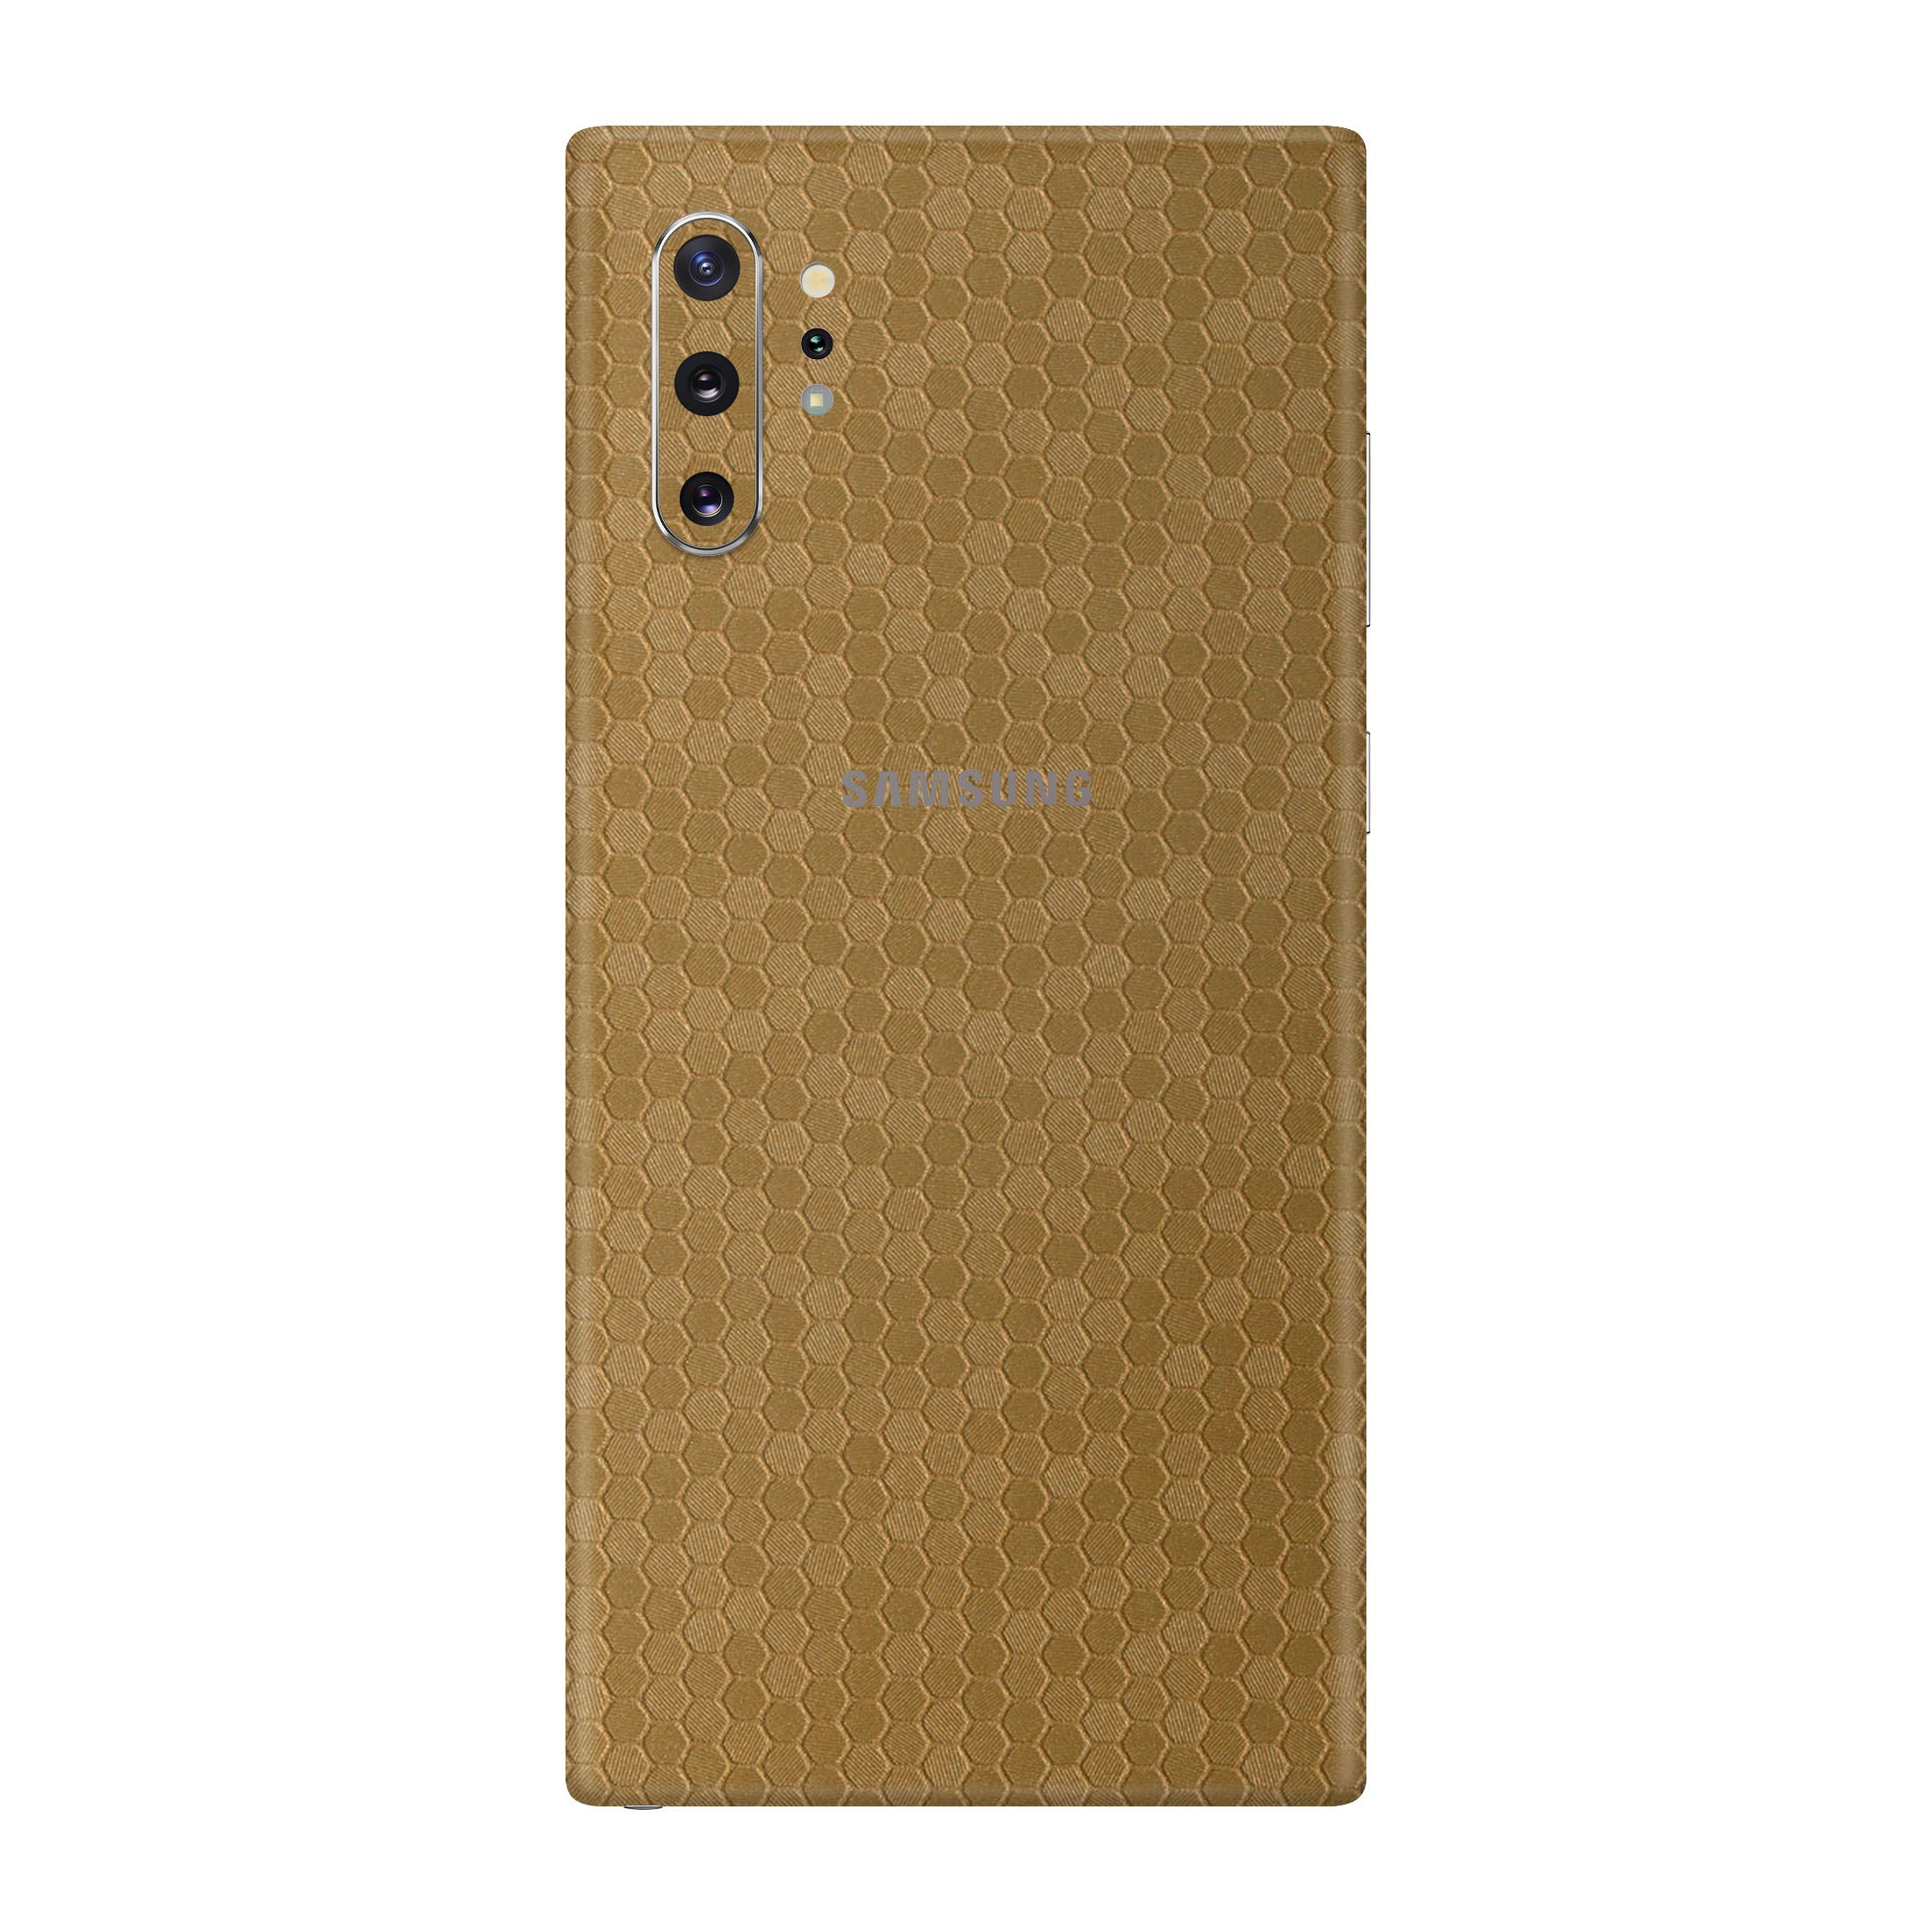 Honeycomb Gold Skin for Samsung Note 10 Plus